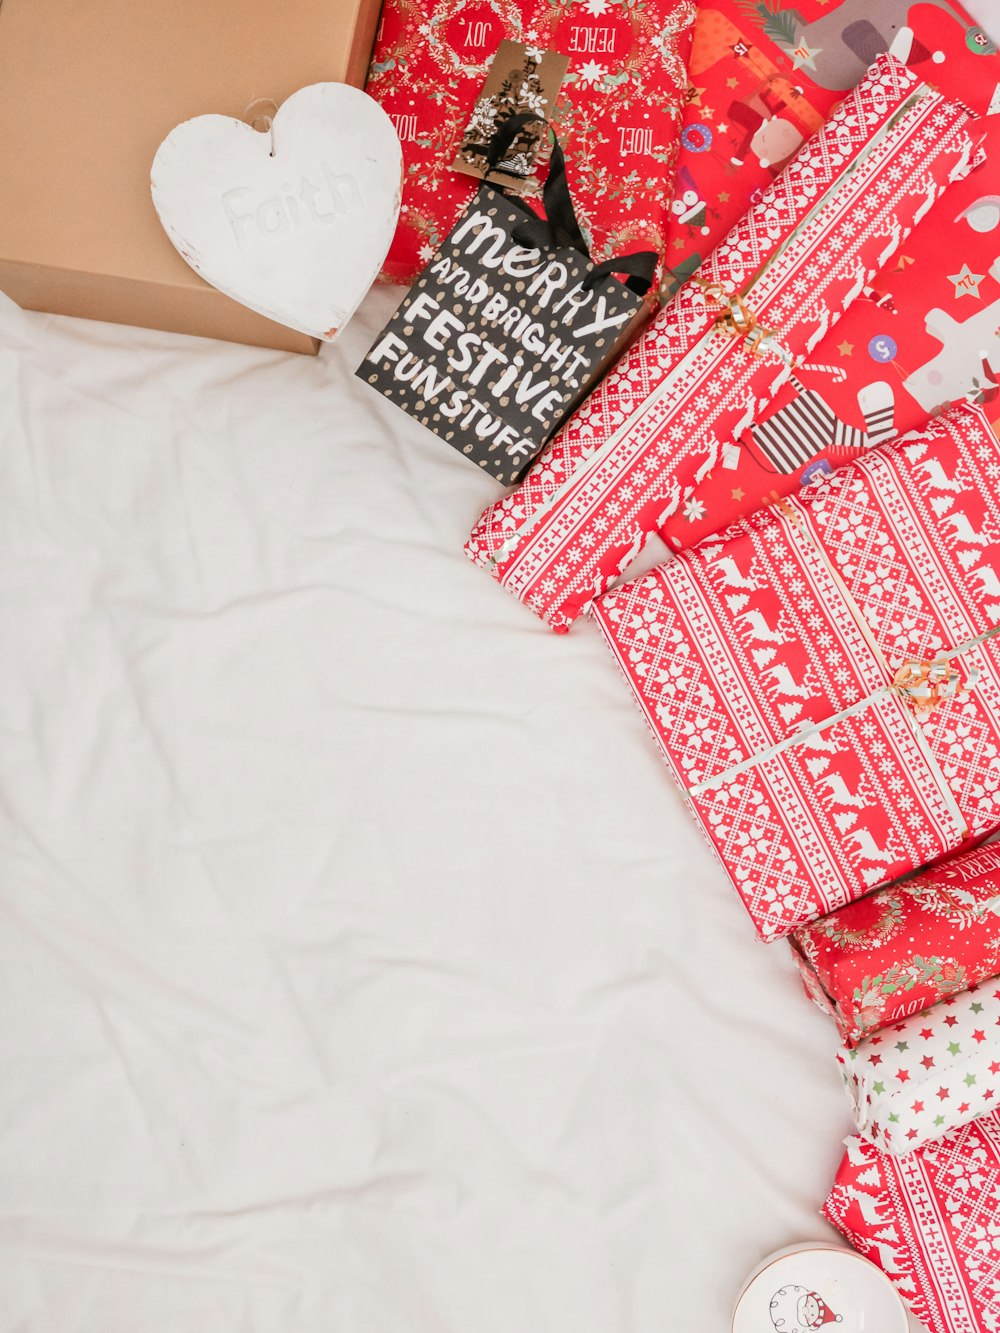 red and black packed presents on white textile